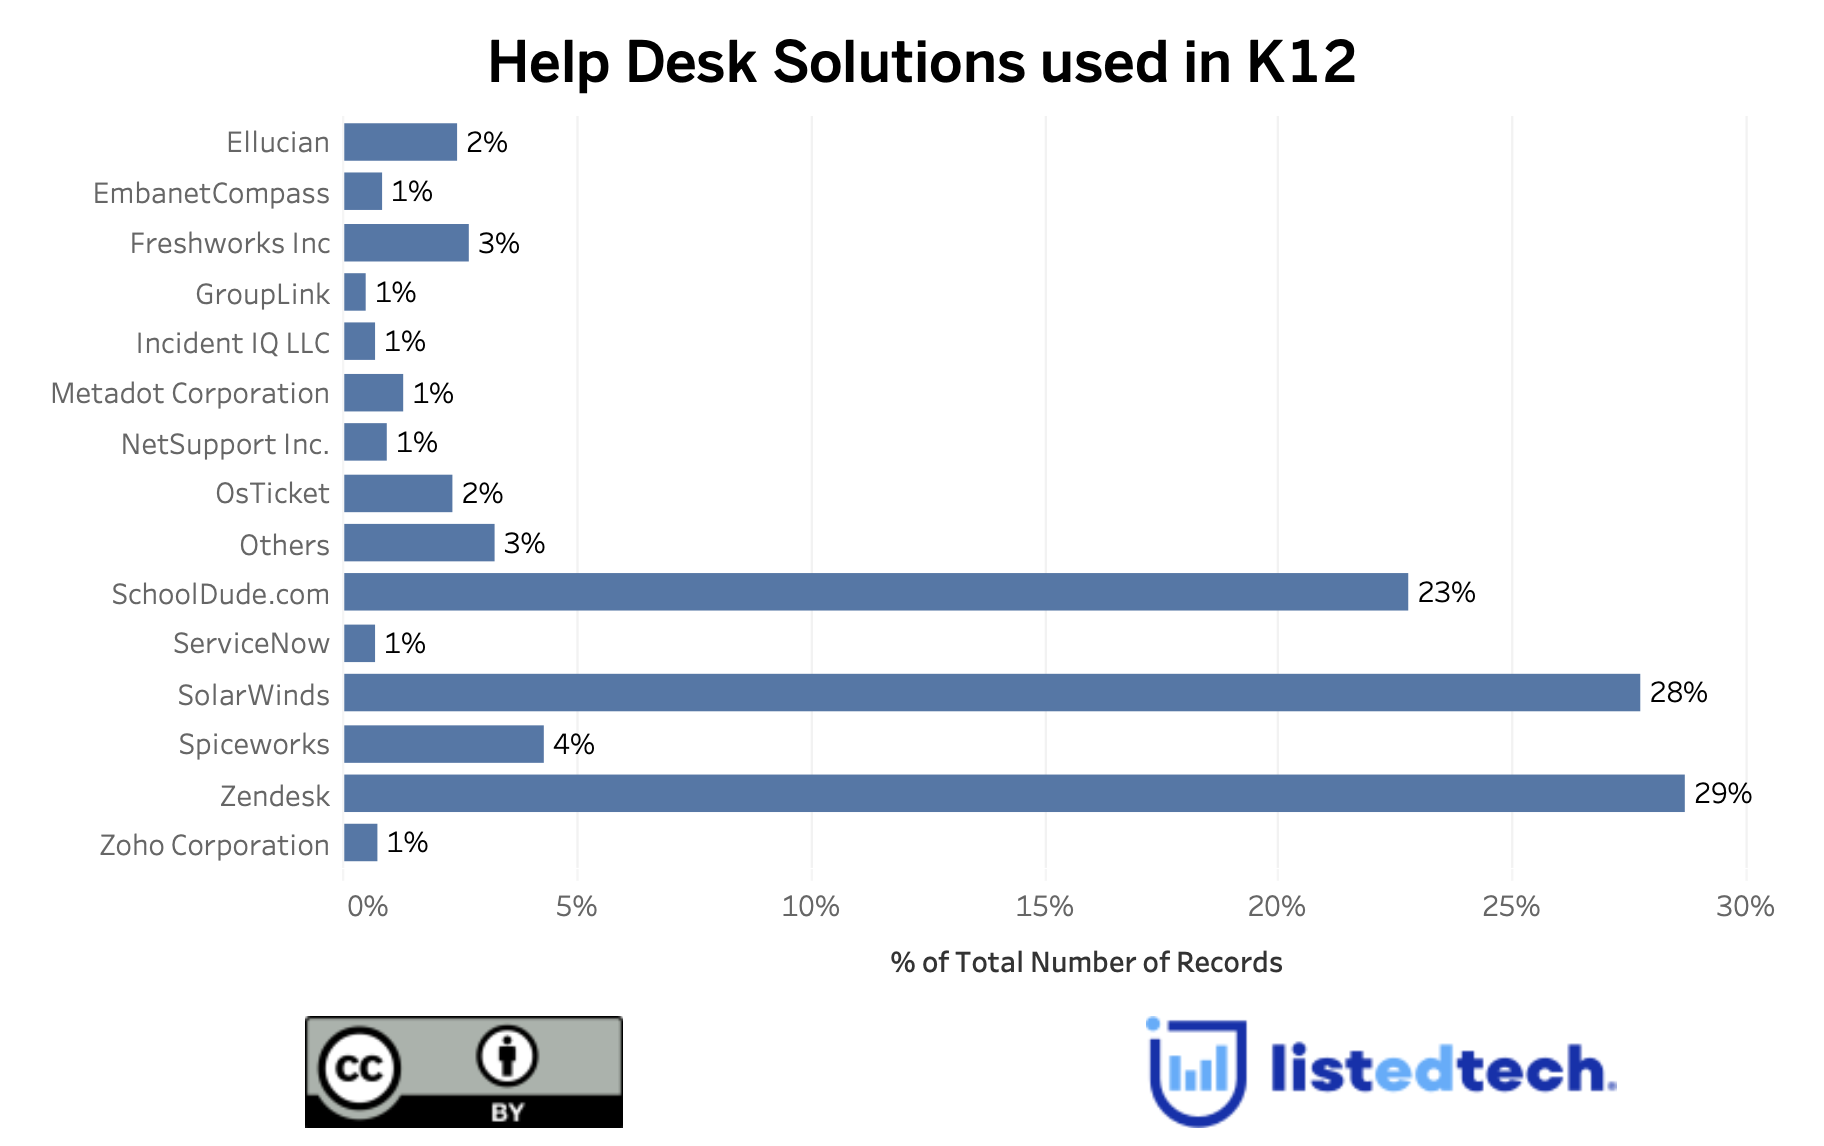 Help Desk Solutions Used in K-12